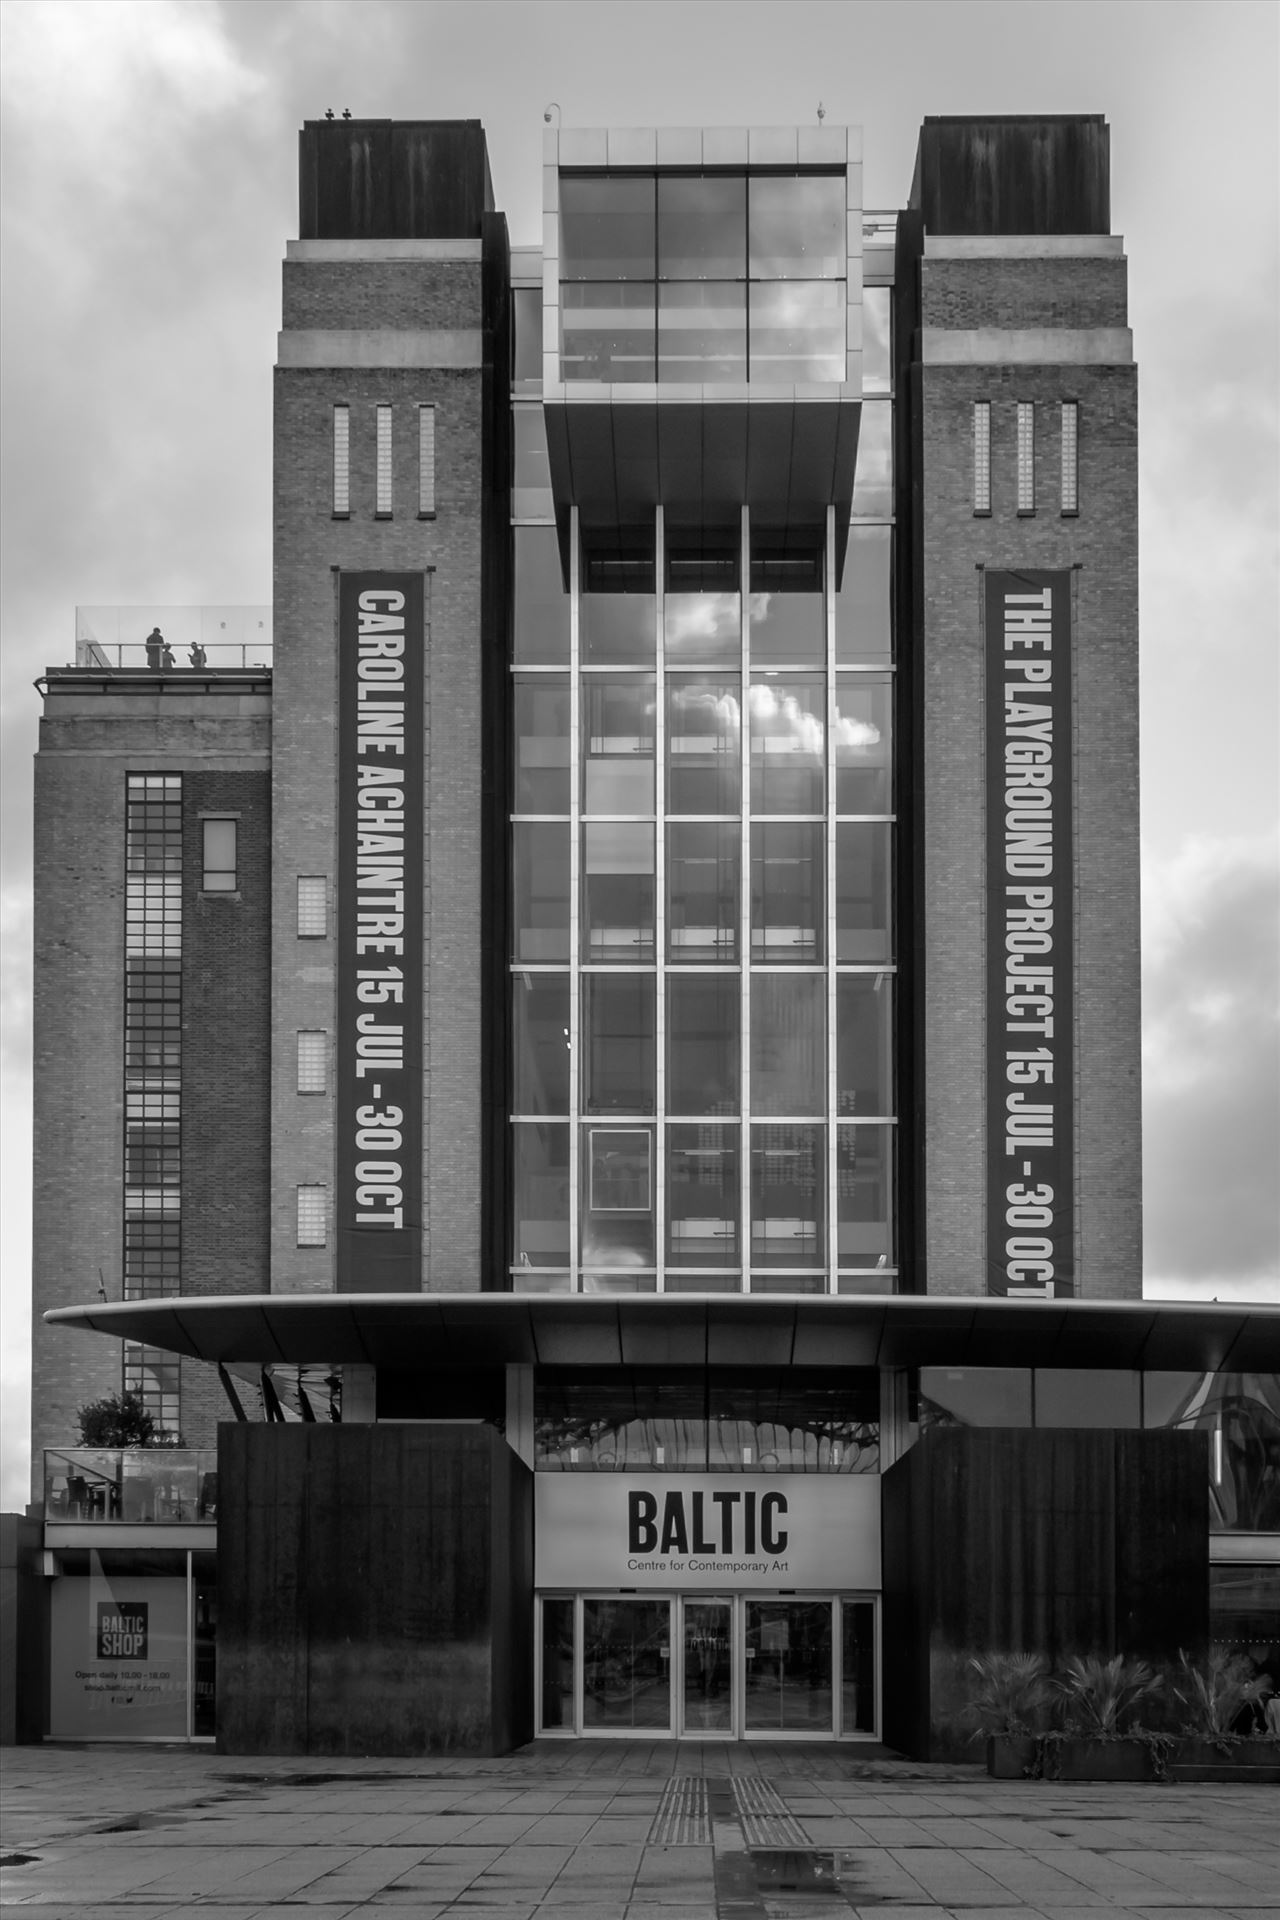 Baltic Centre for Contemporary Art, GatesheadHoused in the Landmark, J R Rank Flour Mill building, its a major International centre for contemporary art. 2,600 square metres of art space, and boasts a rooftop restaurant with magnificent view of the River Tyne and Quayside.